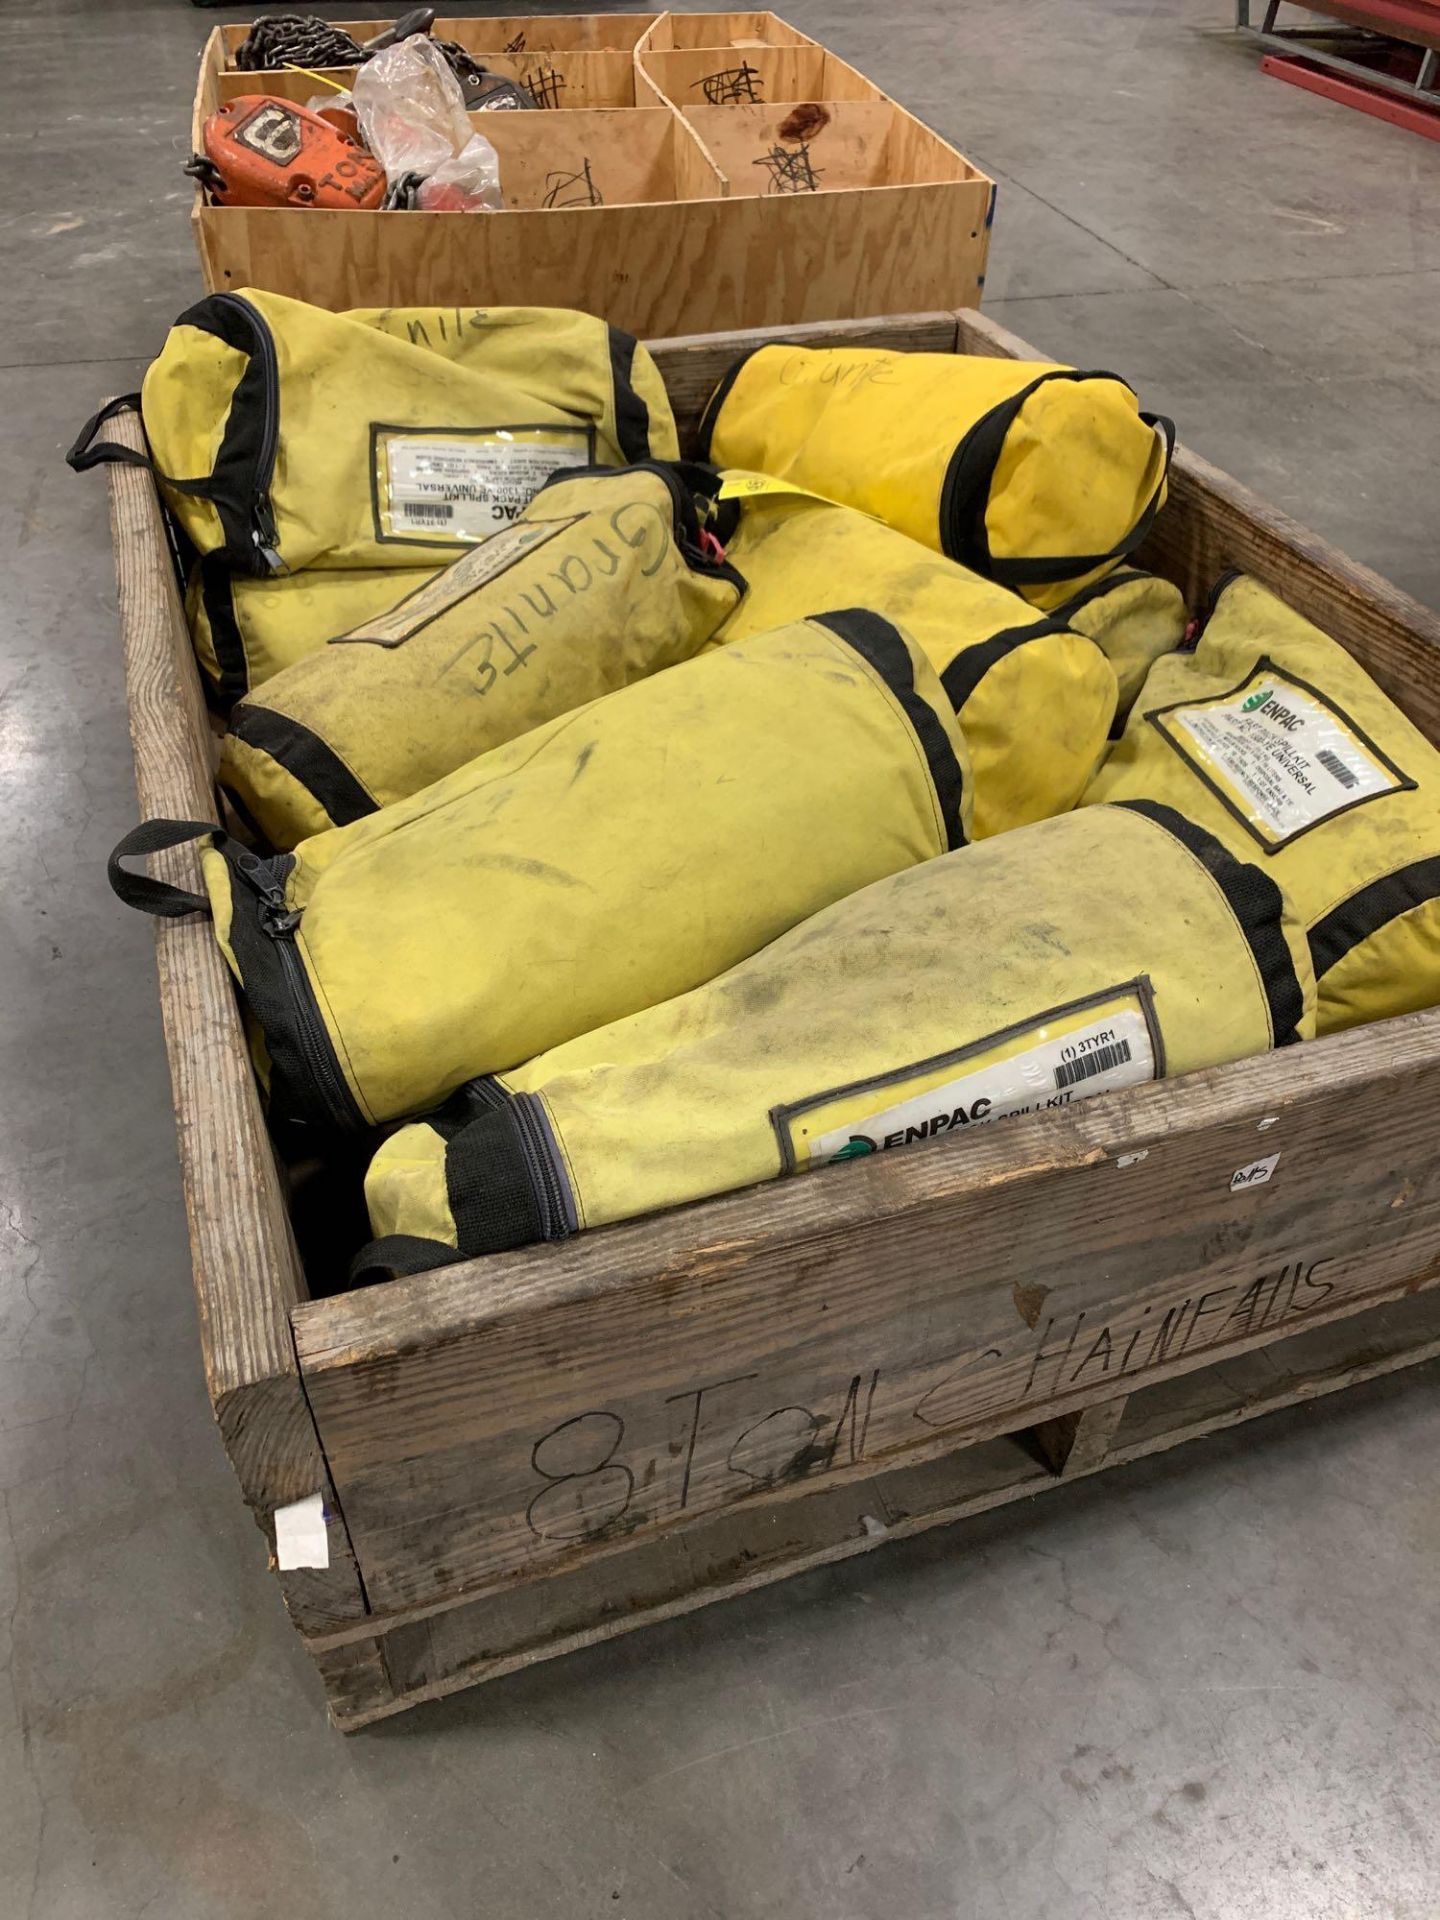 11 ENERPAC FAST PACK SPILLKIT 1300-YE UNIVERSAL IN CRATE - Image 2 of 4